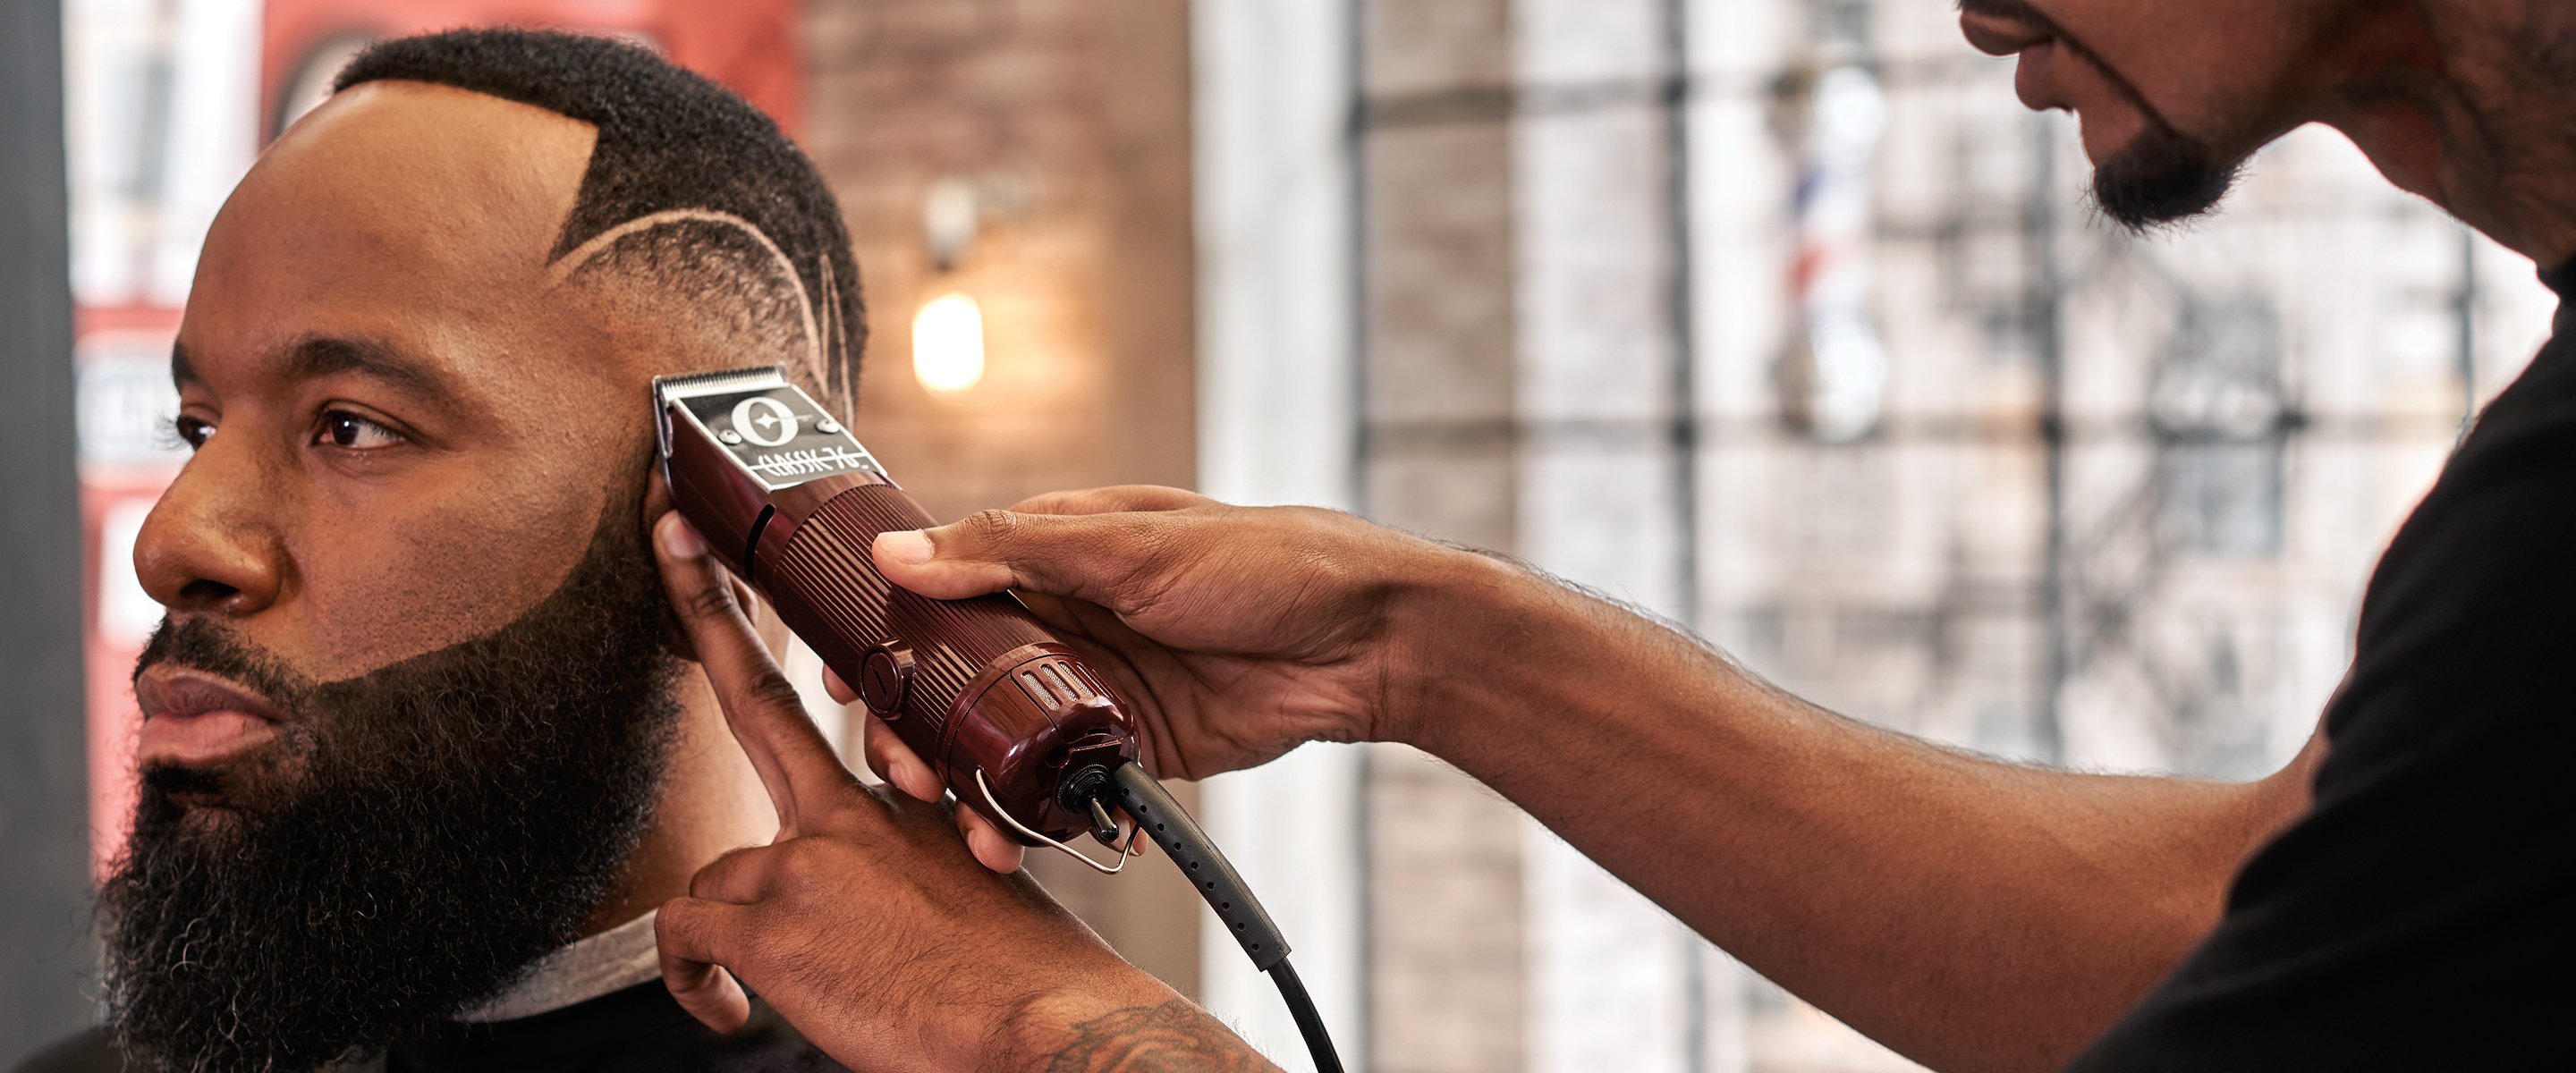 Oster Pro: Professional Barber and Grooming Supplies